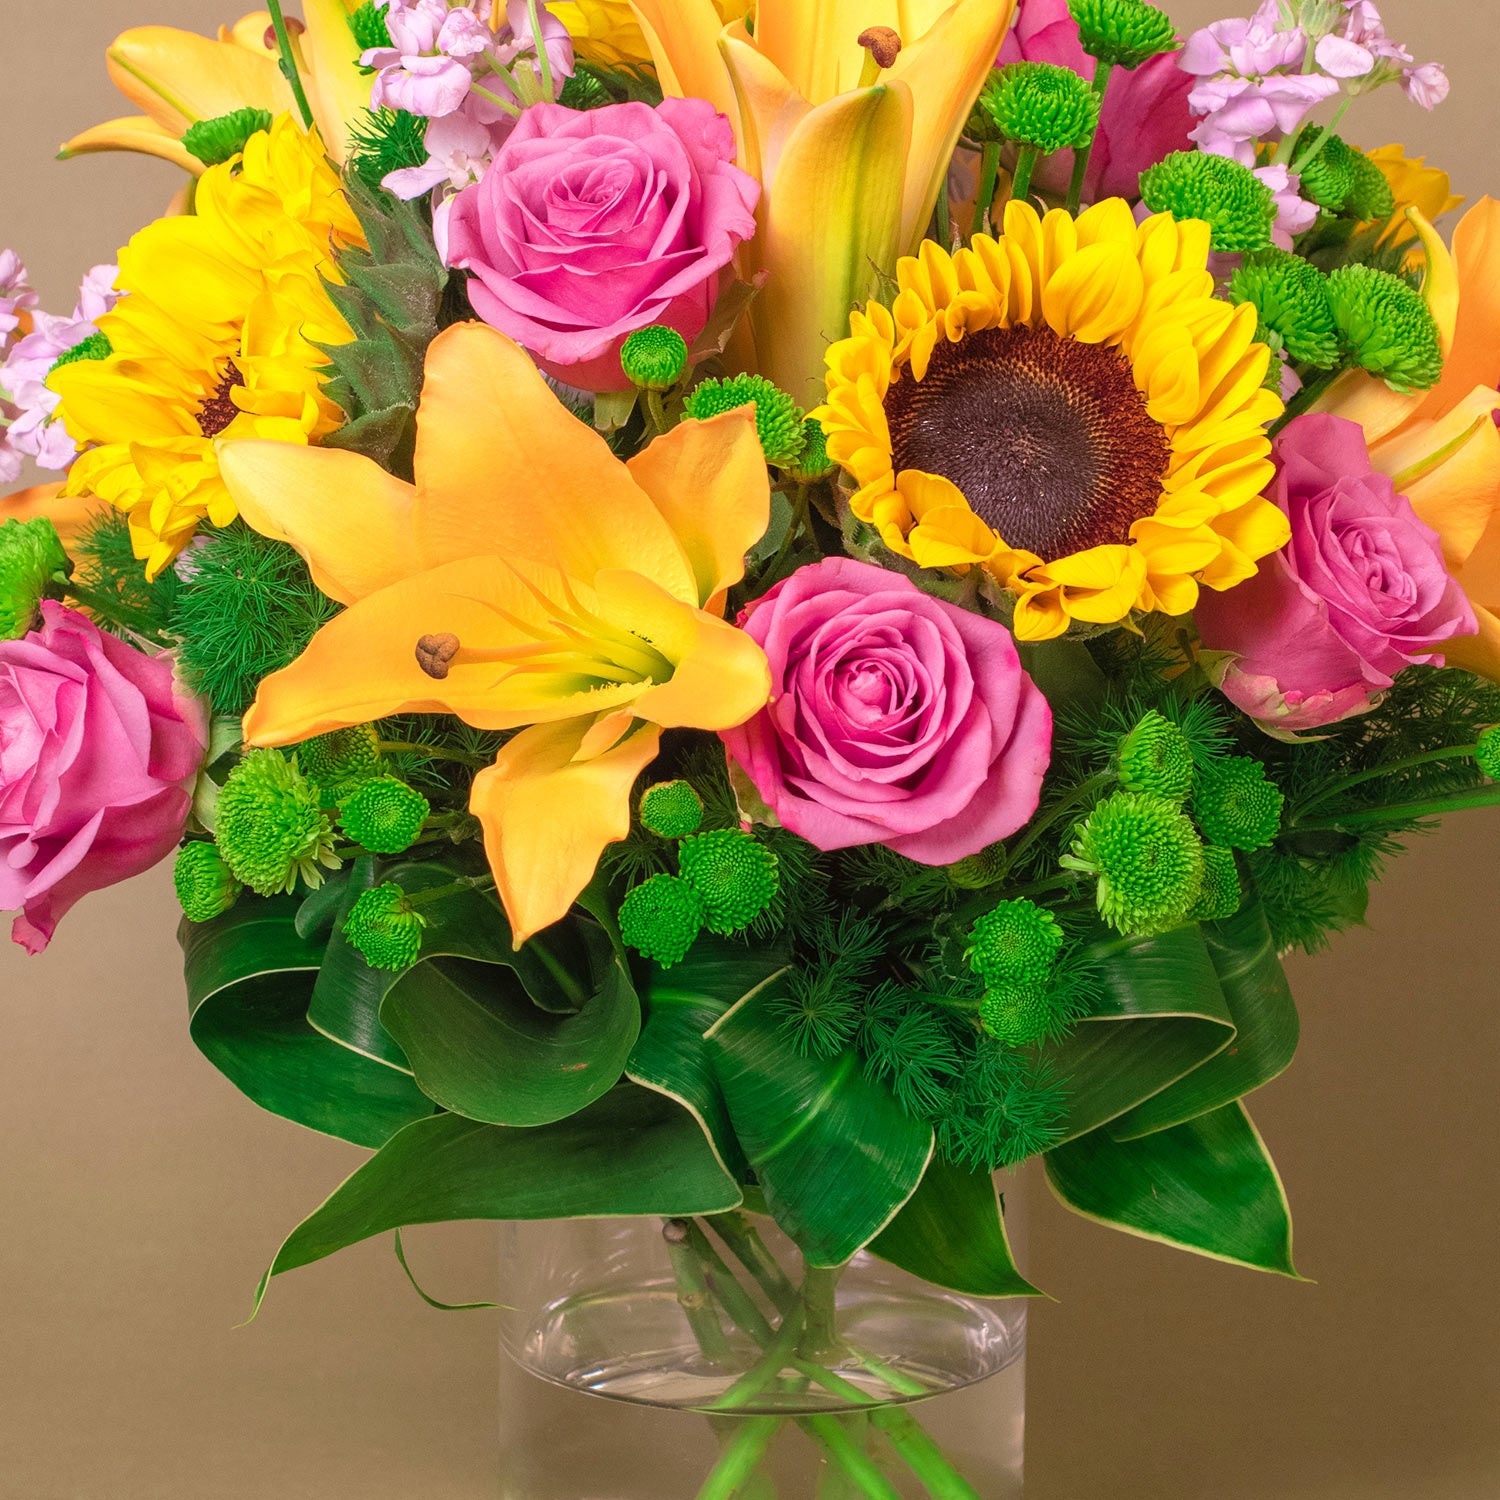 Vivid Bunch Of Flowers In A Glass Vase